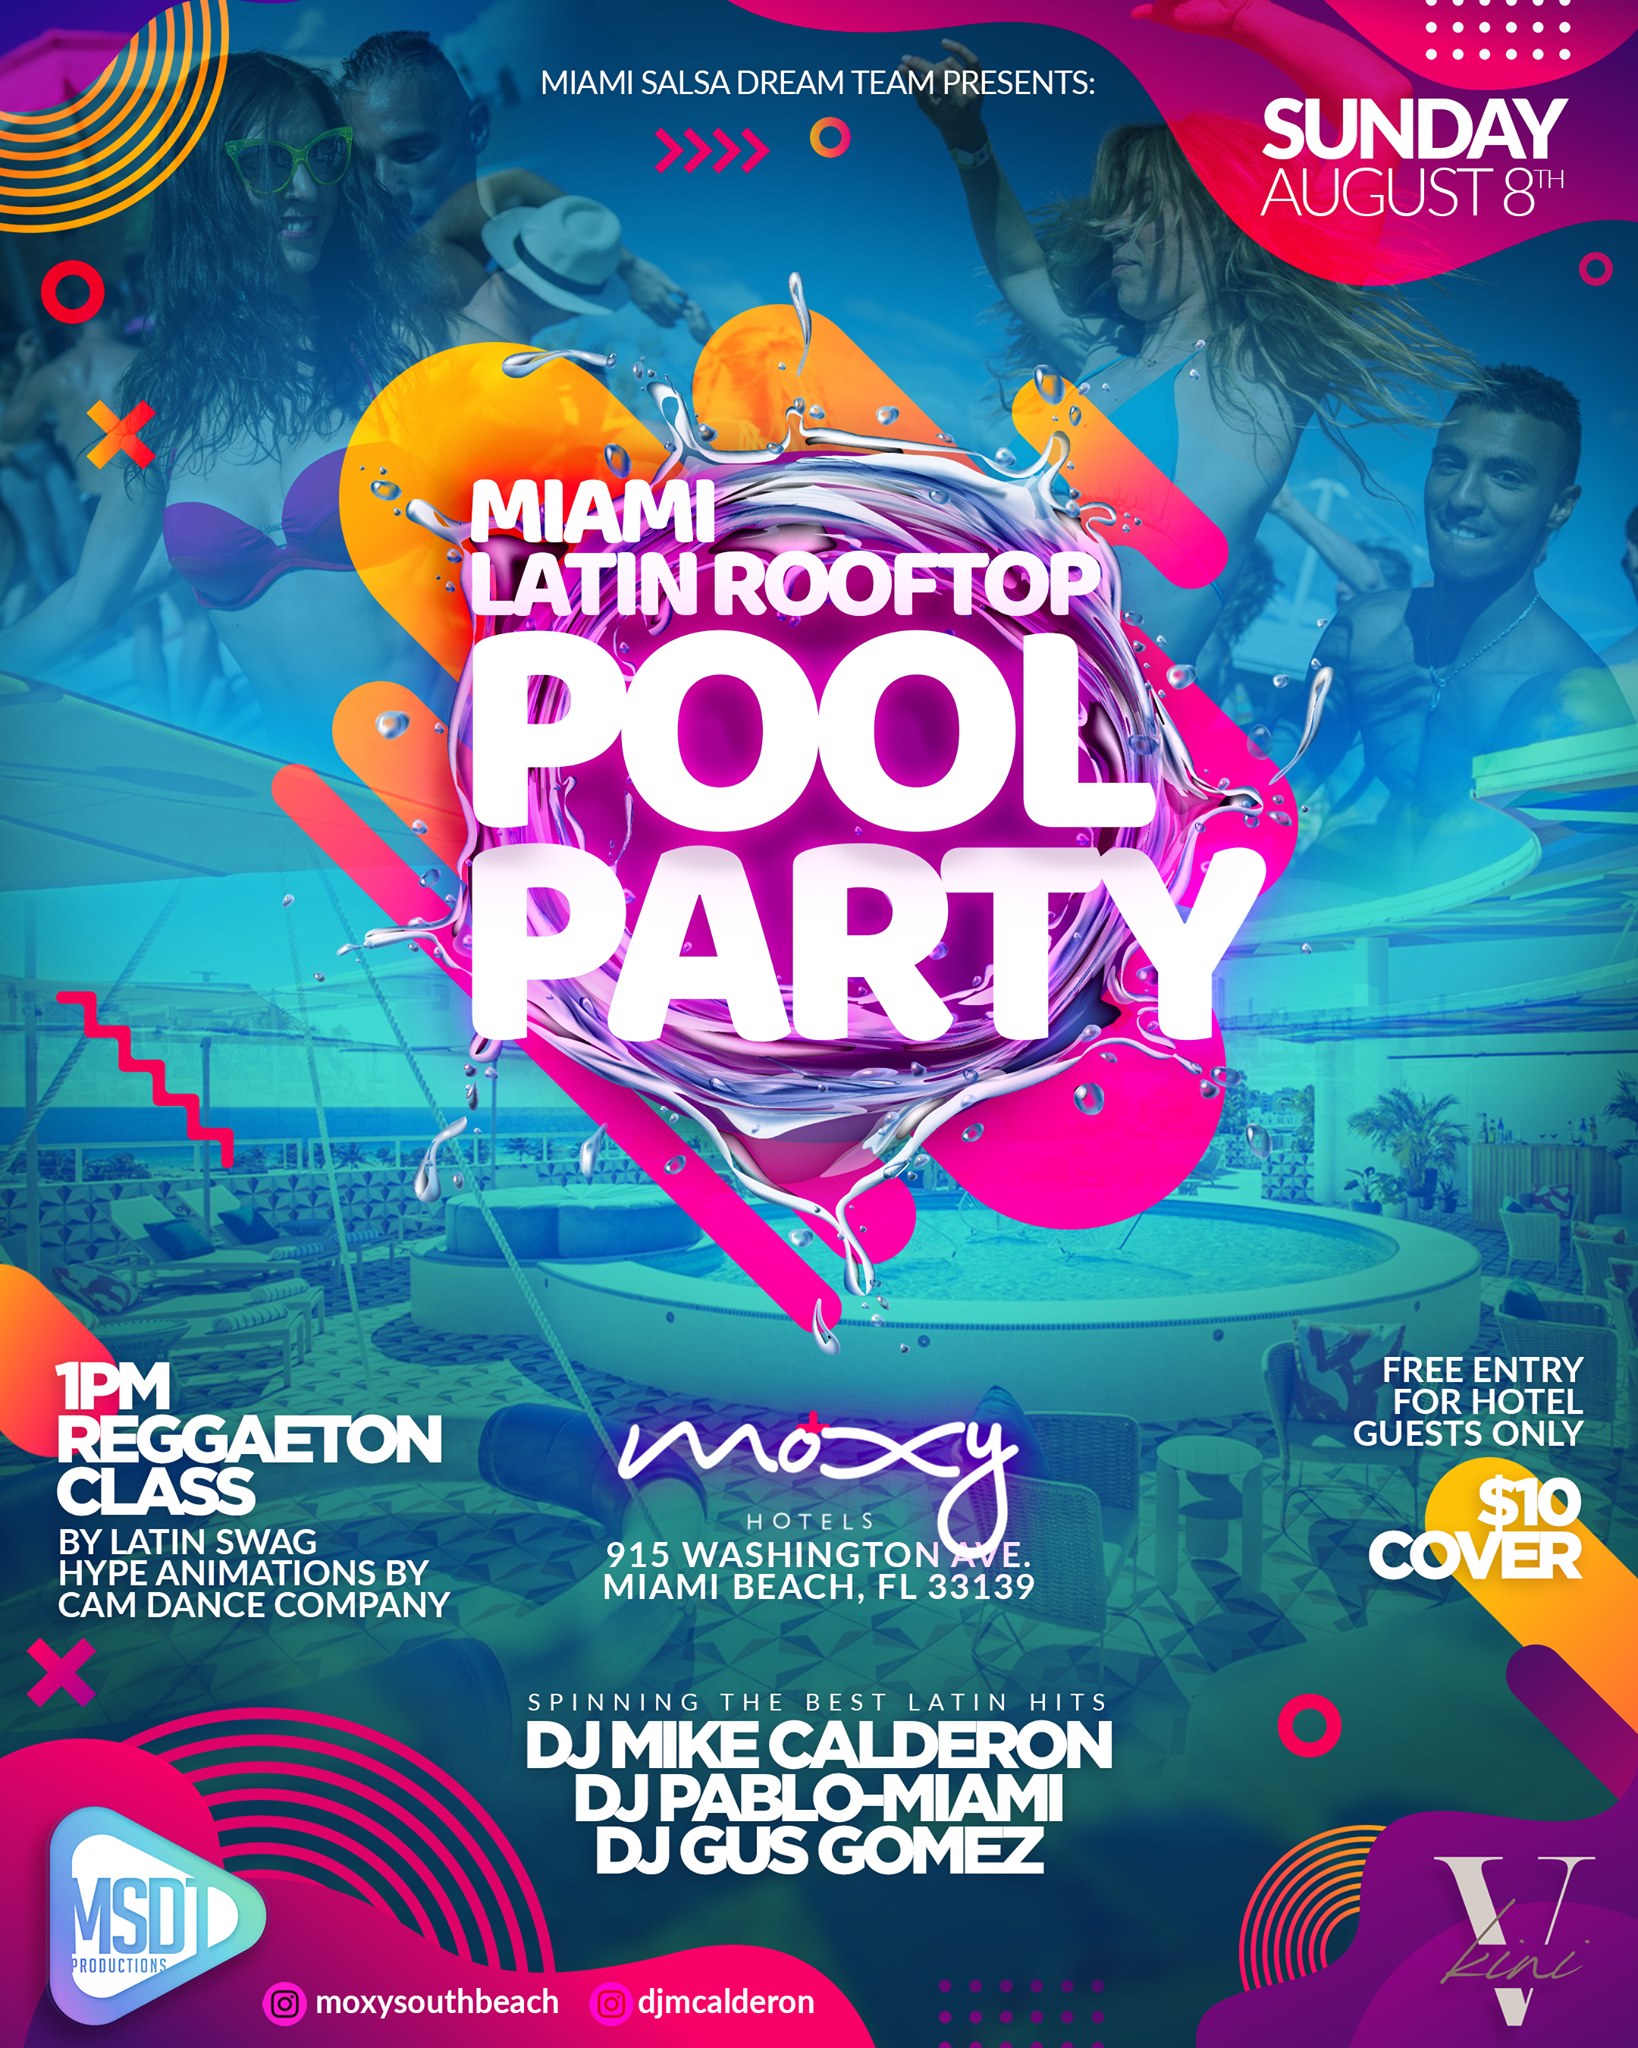 The Miami Latin Rooftop Pool Party South Beach! The Activist Calendar